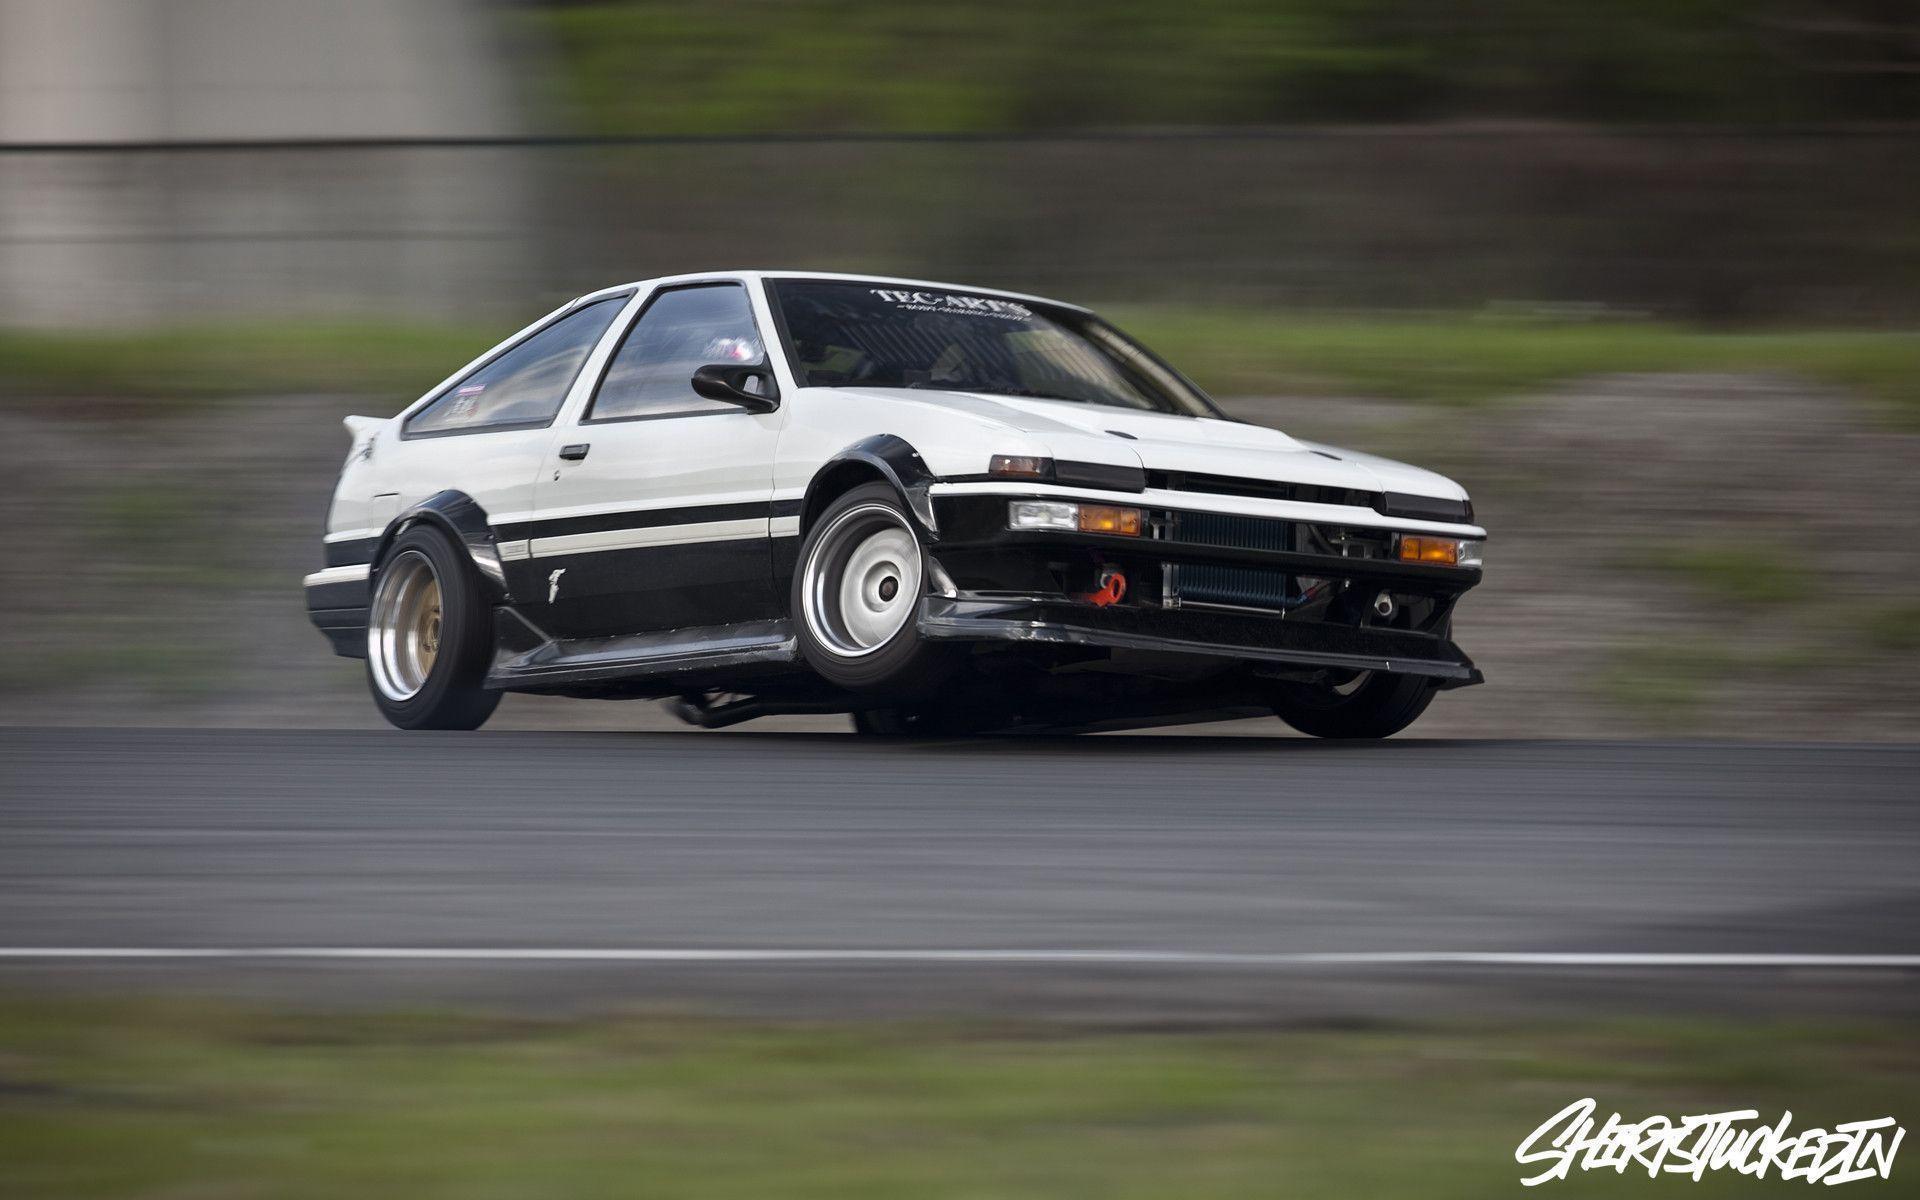 Toyota AE86 Wallpapers - Wallpaper Cave